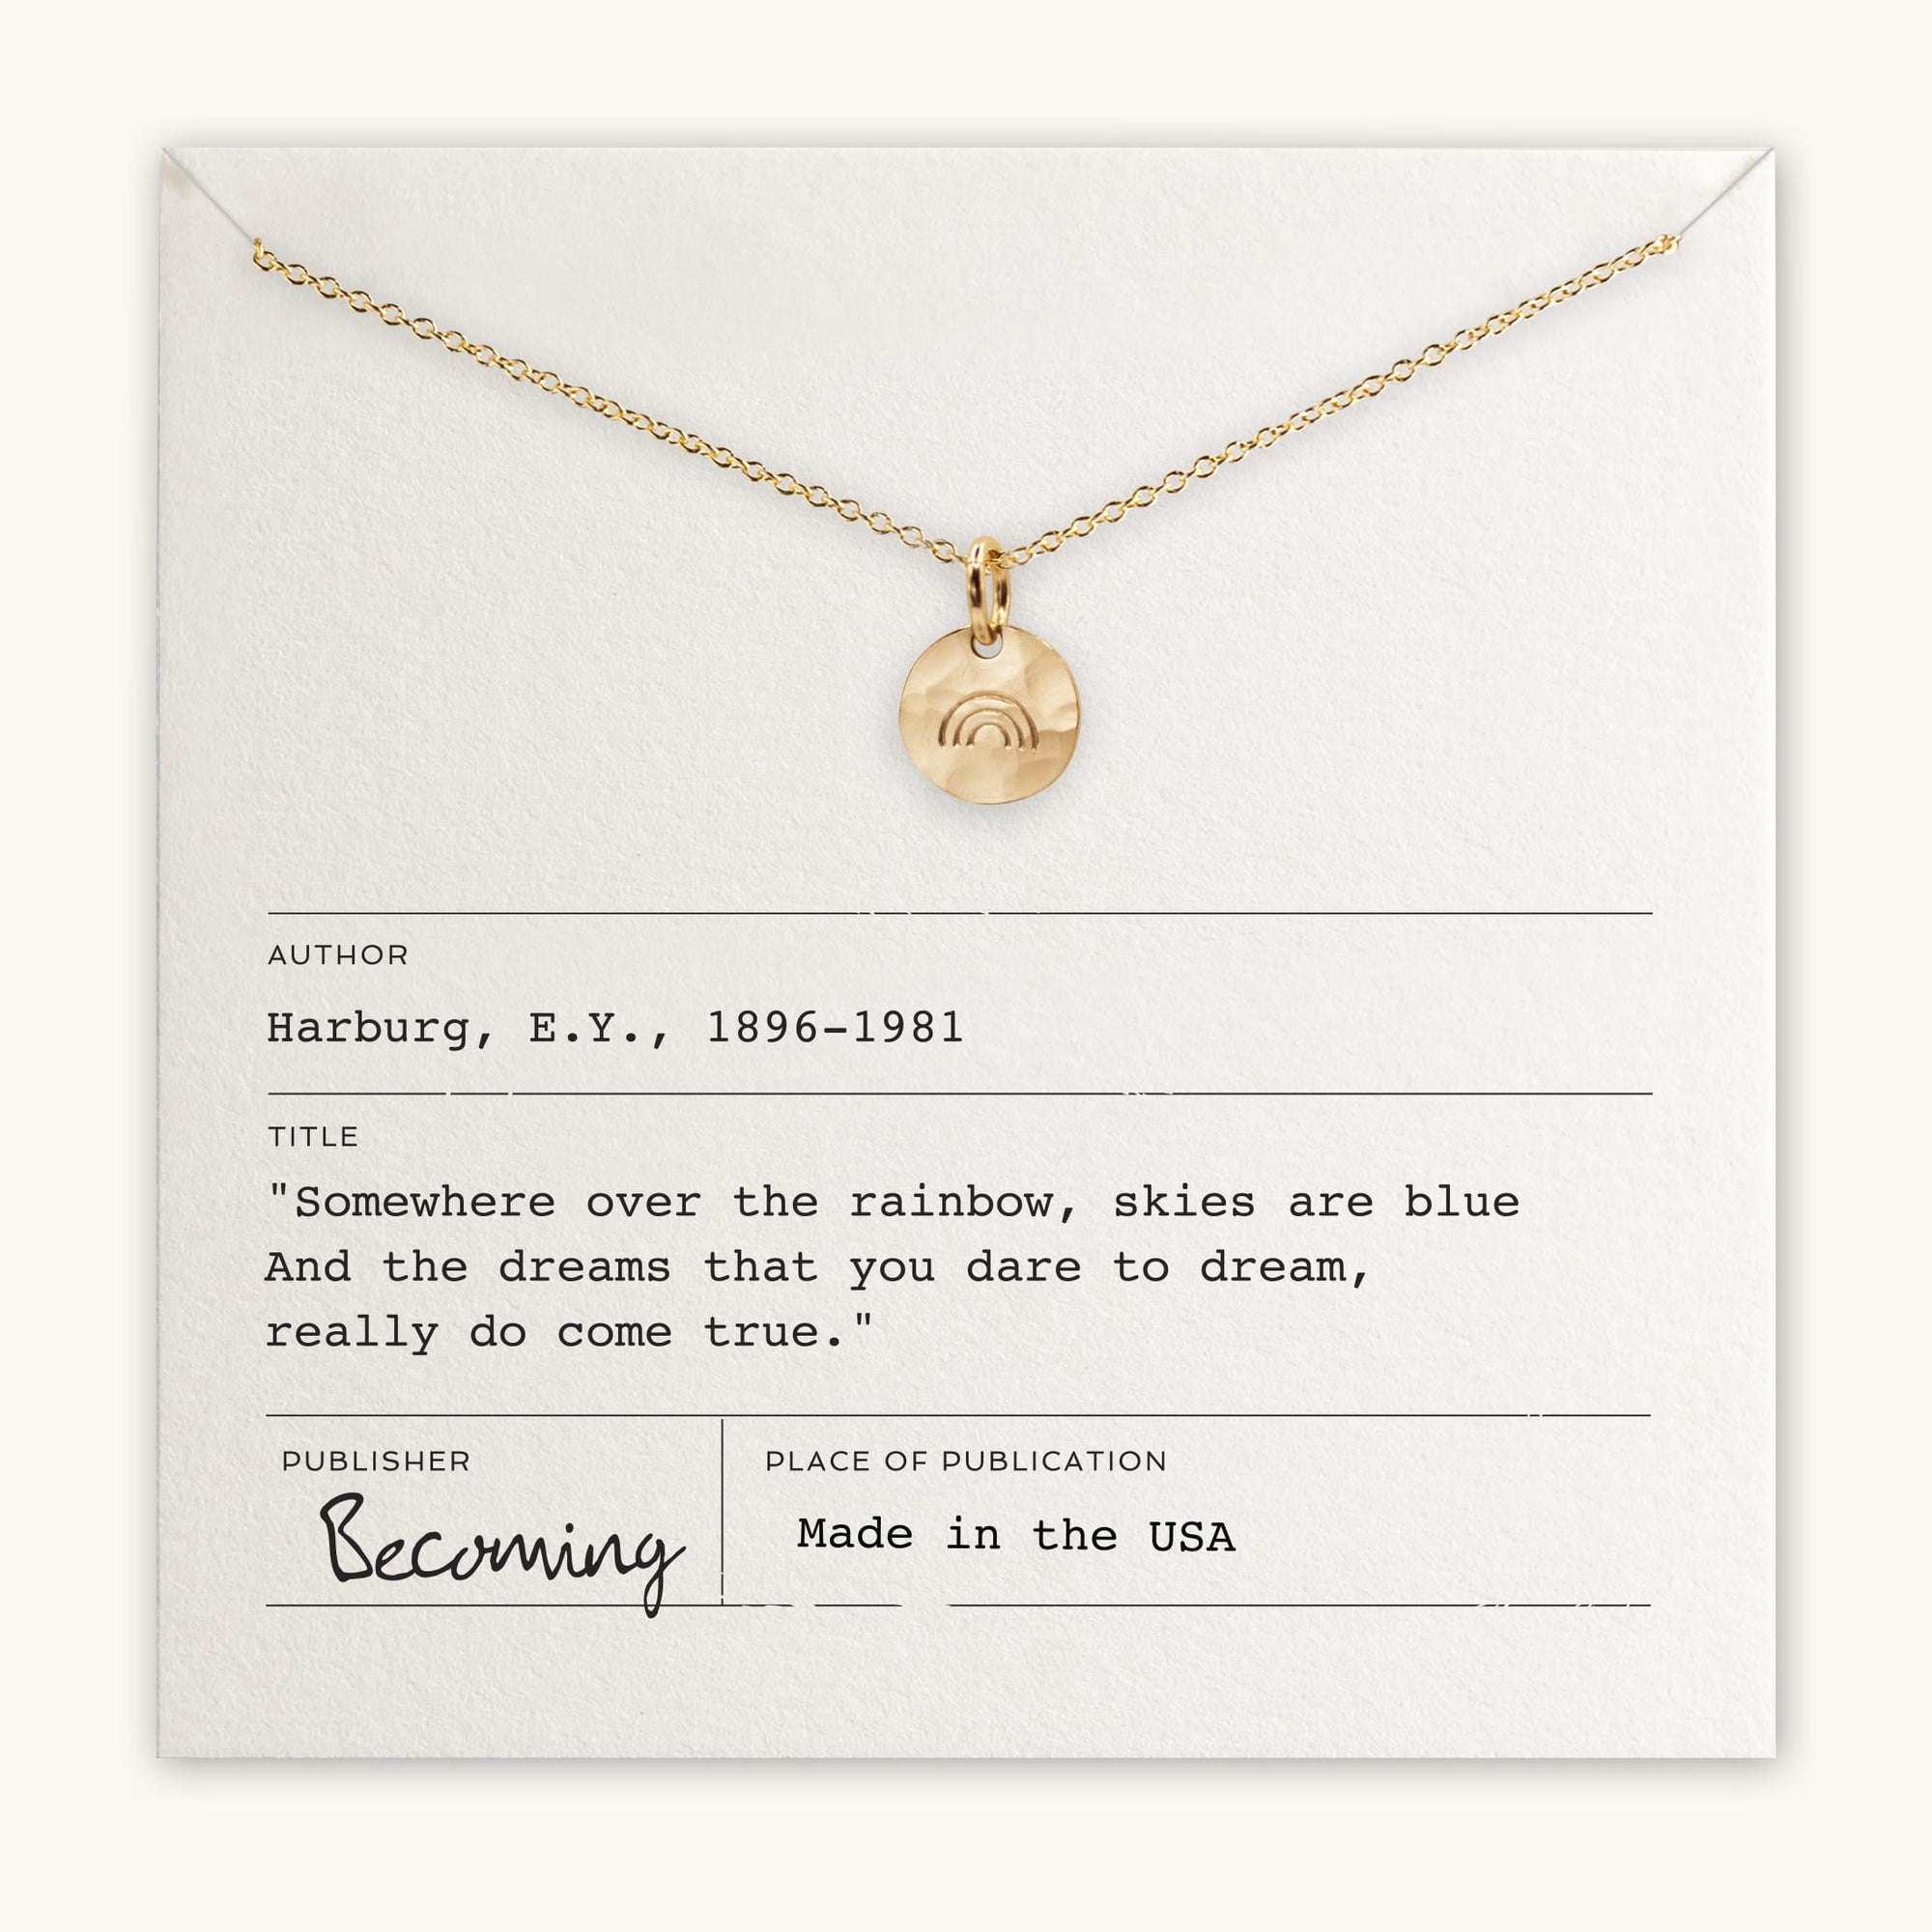 Becoming Jewelry&#39;s Over the Rainbow Necklace displayed on a card with an inspirational quote &quot;somewhere over the rainbow, skies are blue, and the dreams that you dare to dream, really do come true.